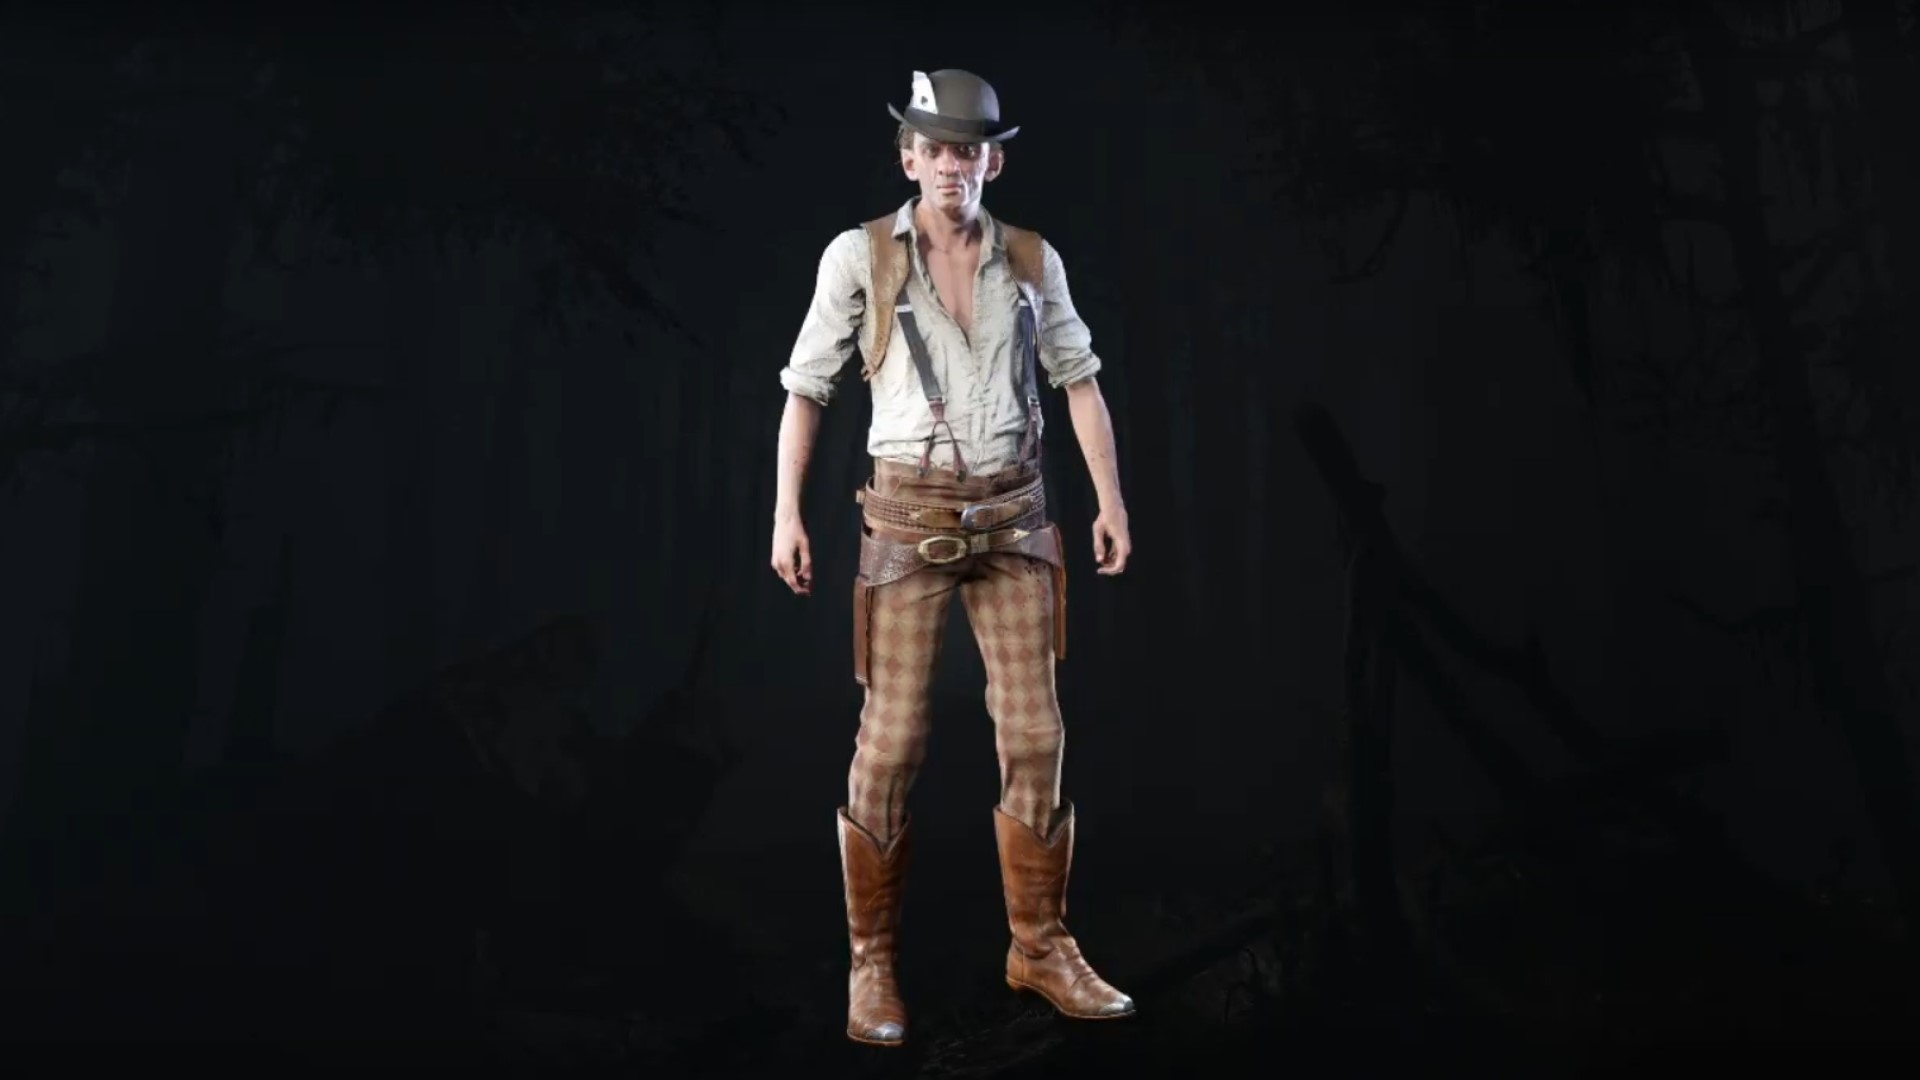 Hunt: Showdown's next update adds new daily rewards and weapon variants